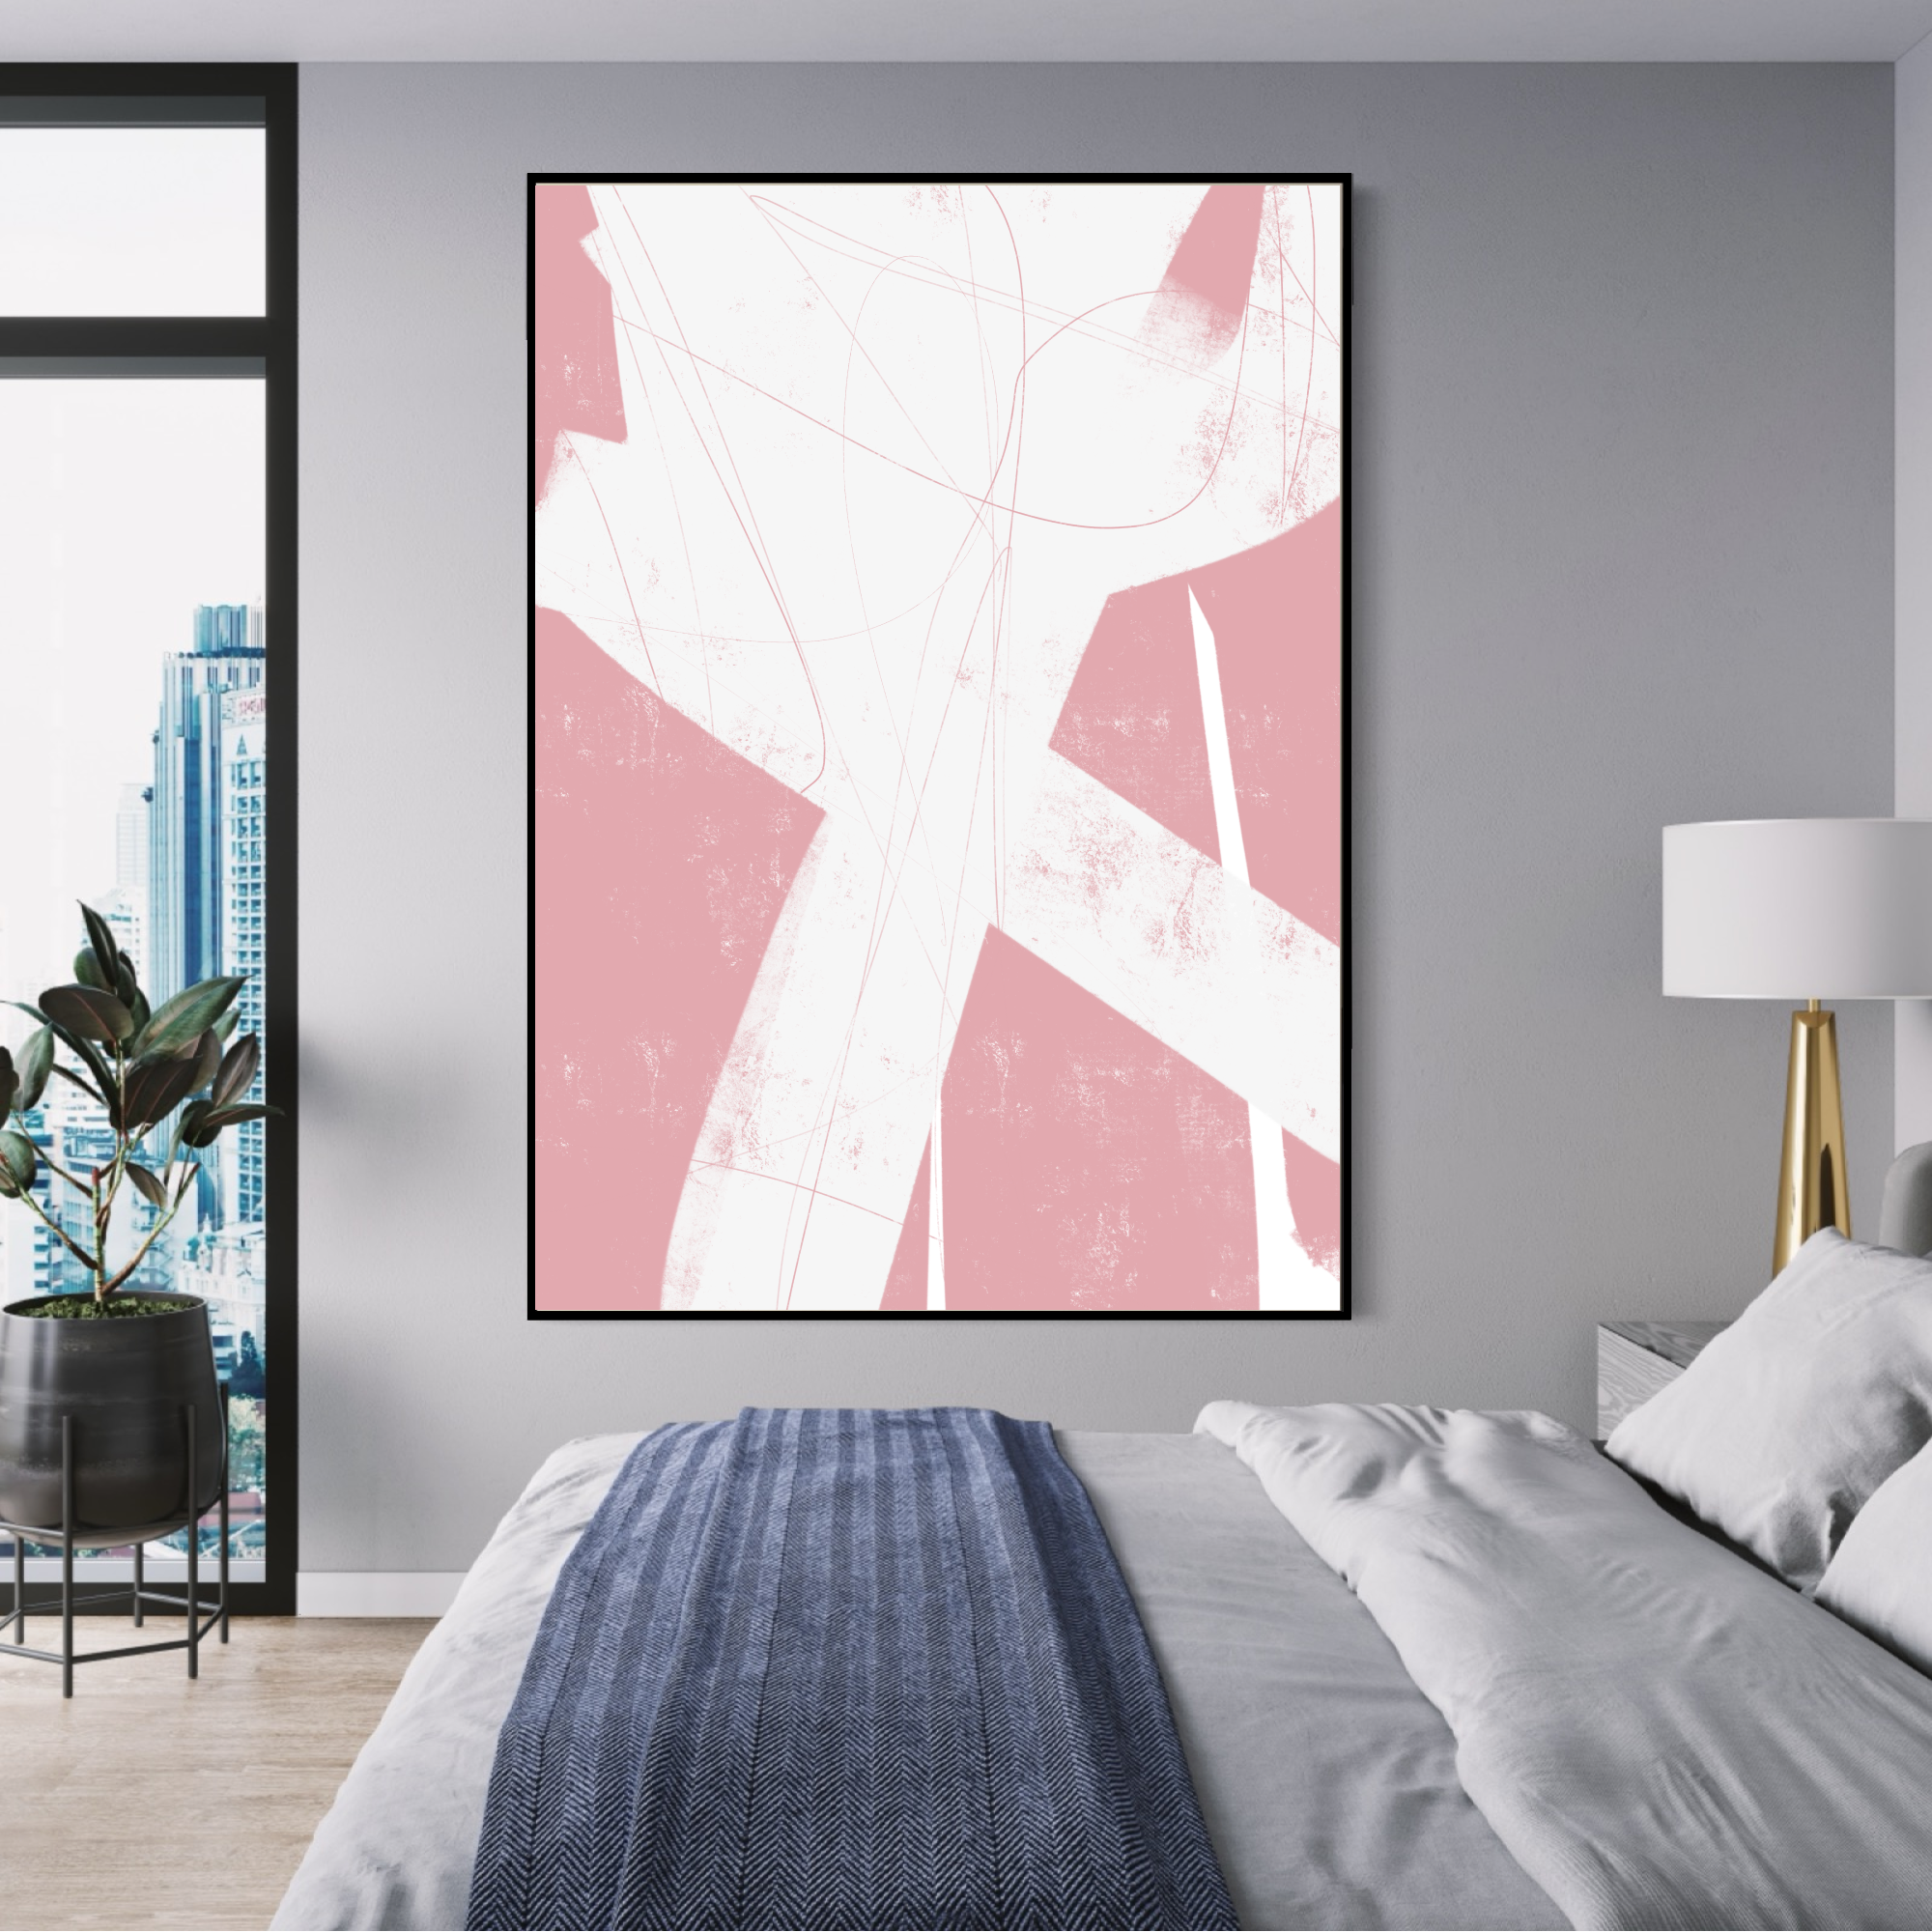 Canvas Print: "All Of The Thoughts #3"